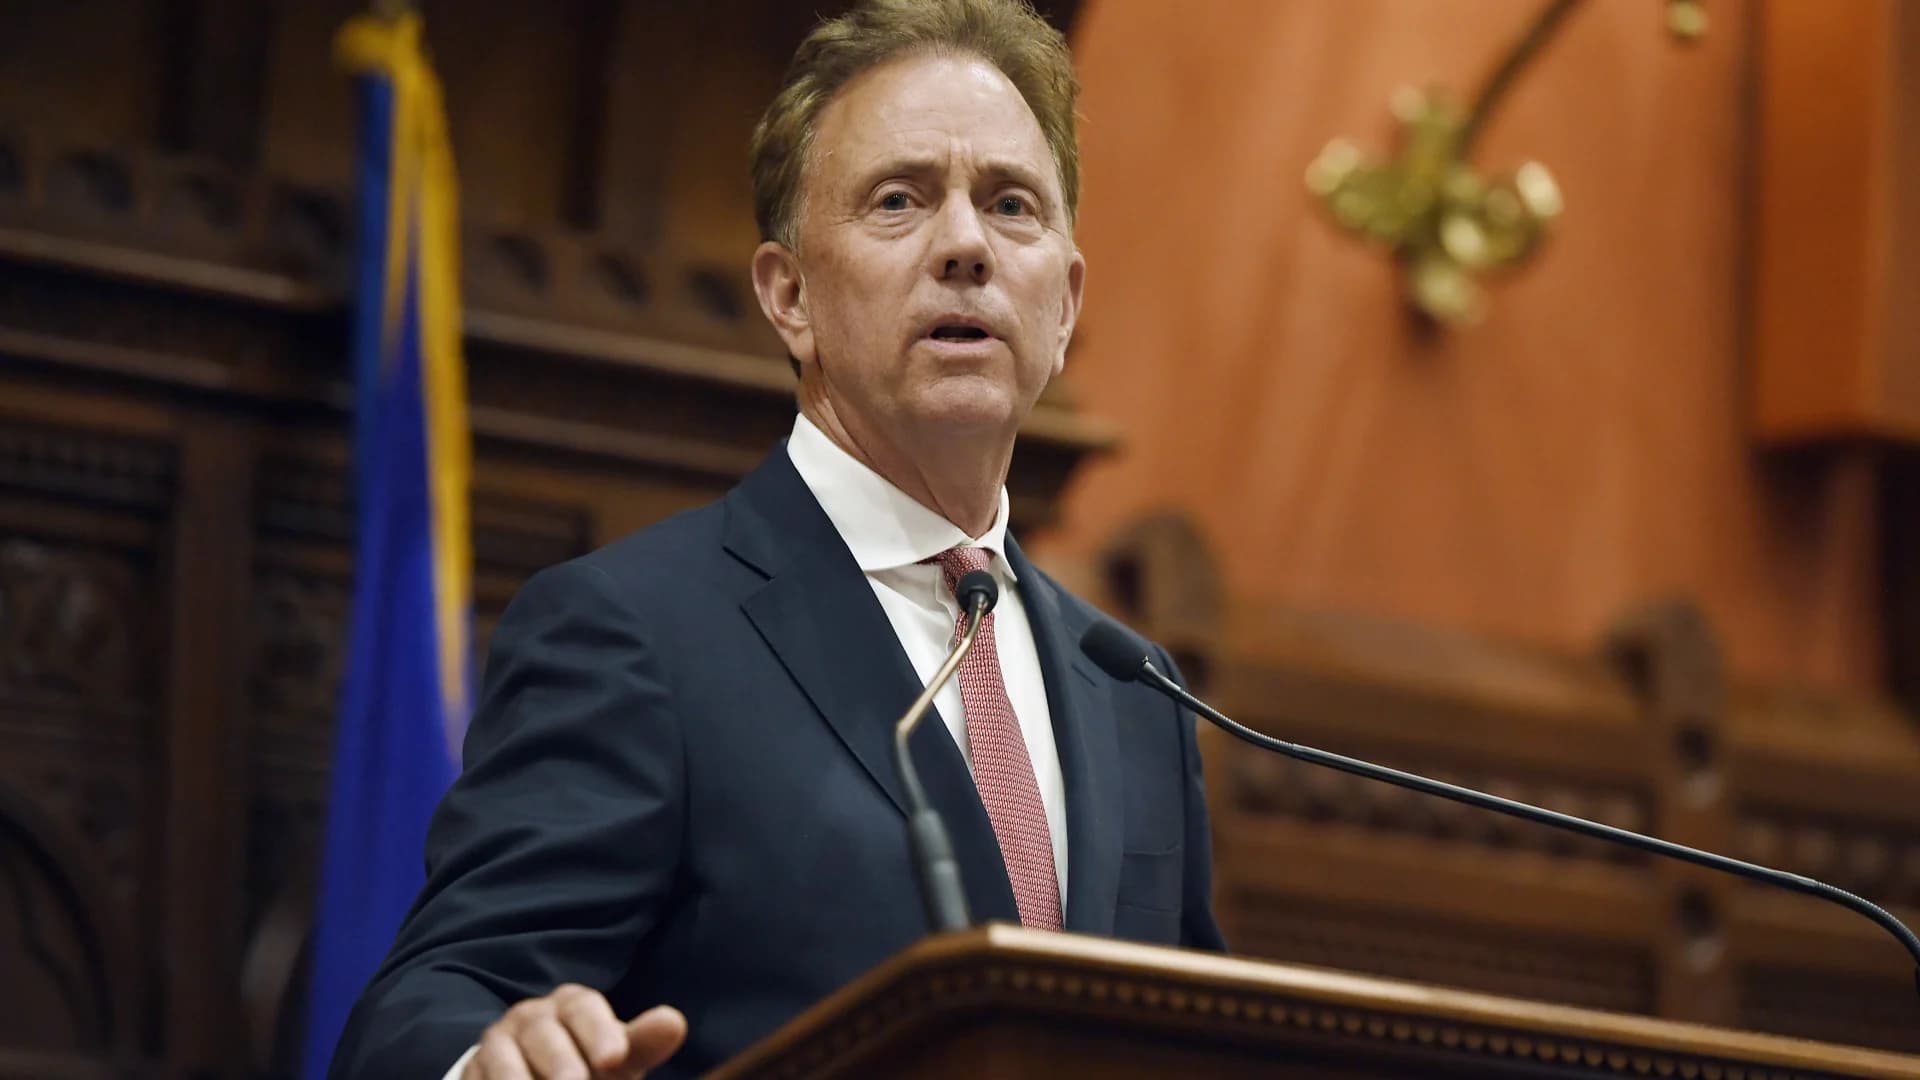 Lamont's chief of staff says staffer tests positive for COVID-19